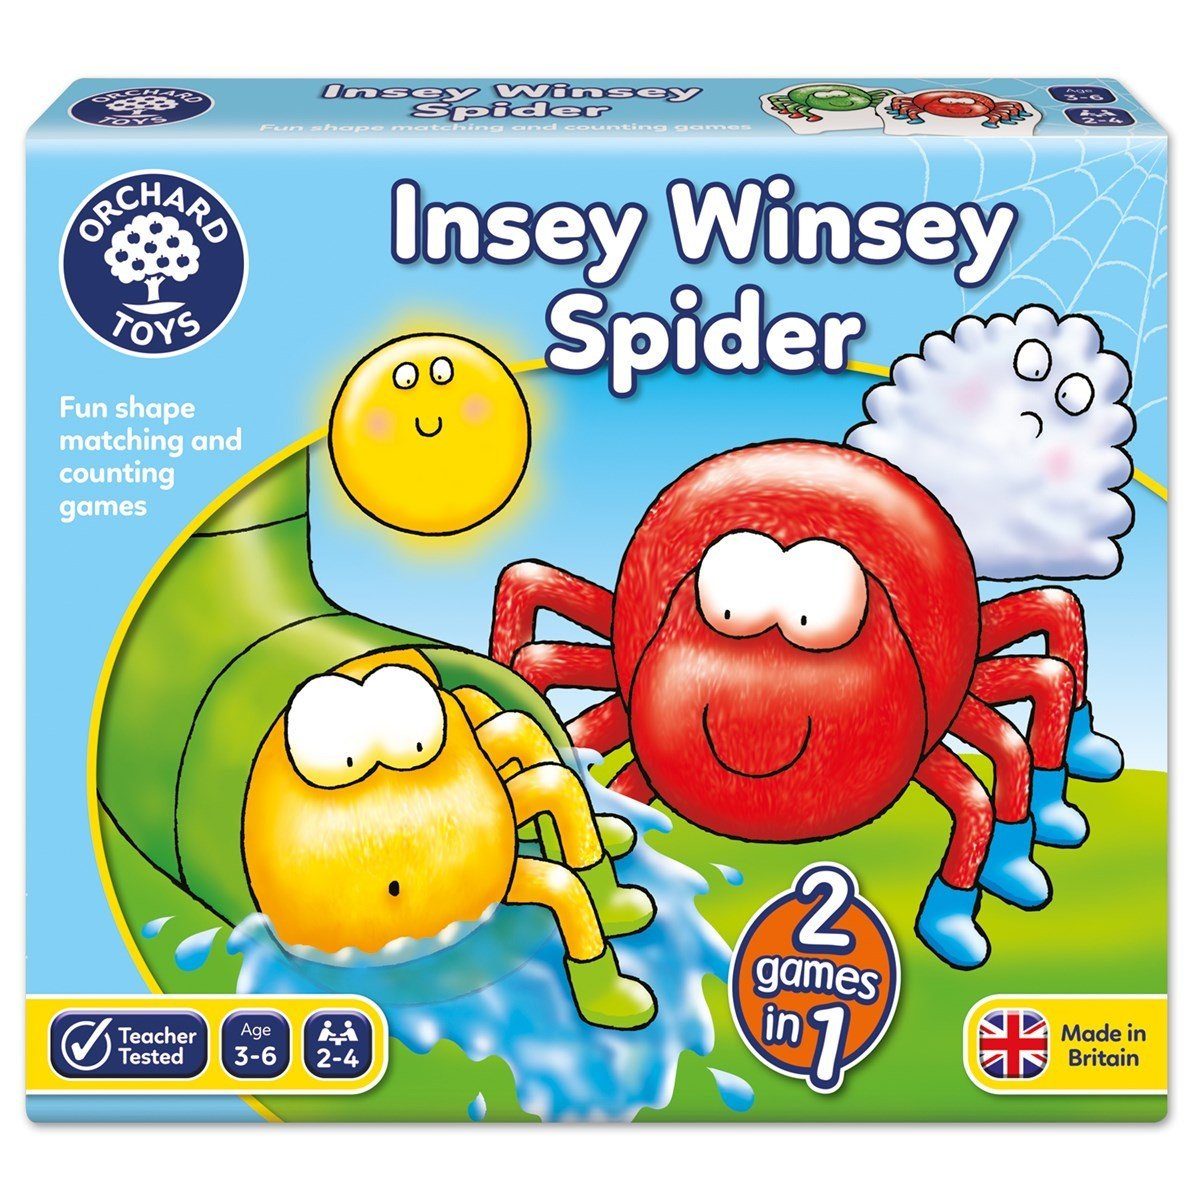 Insey Winsey Spider Toys Orchard Toys 